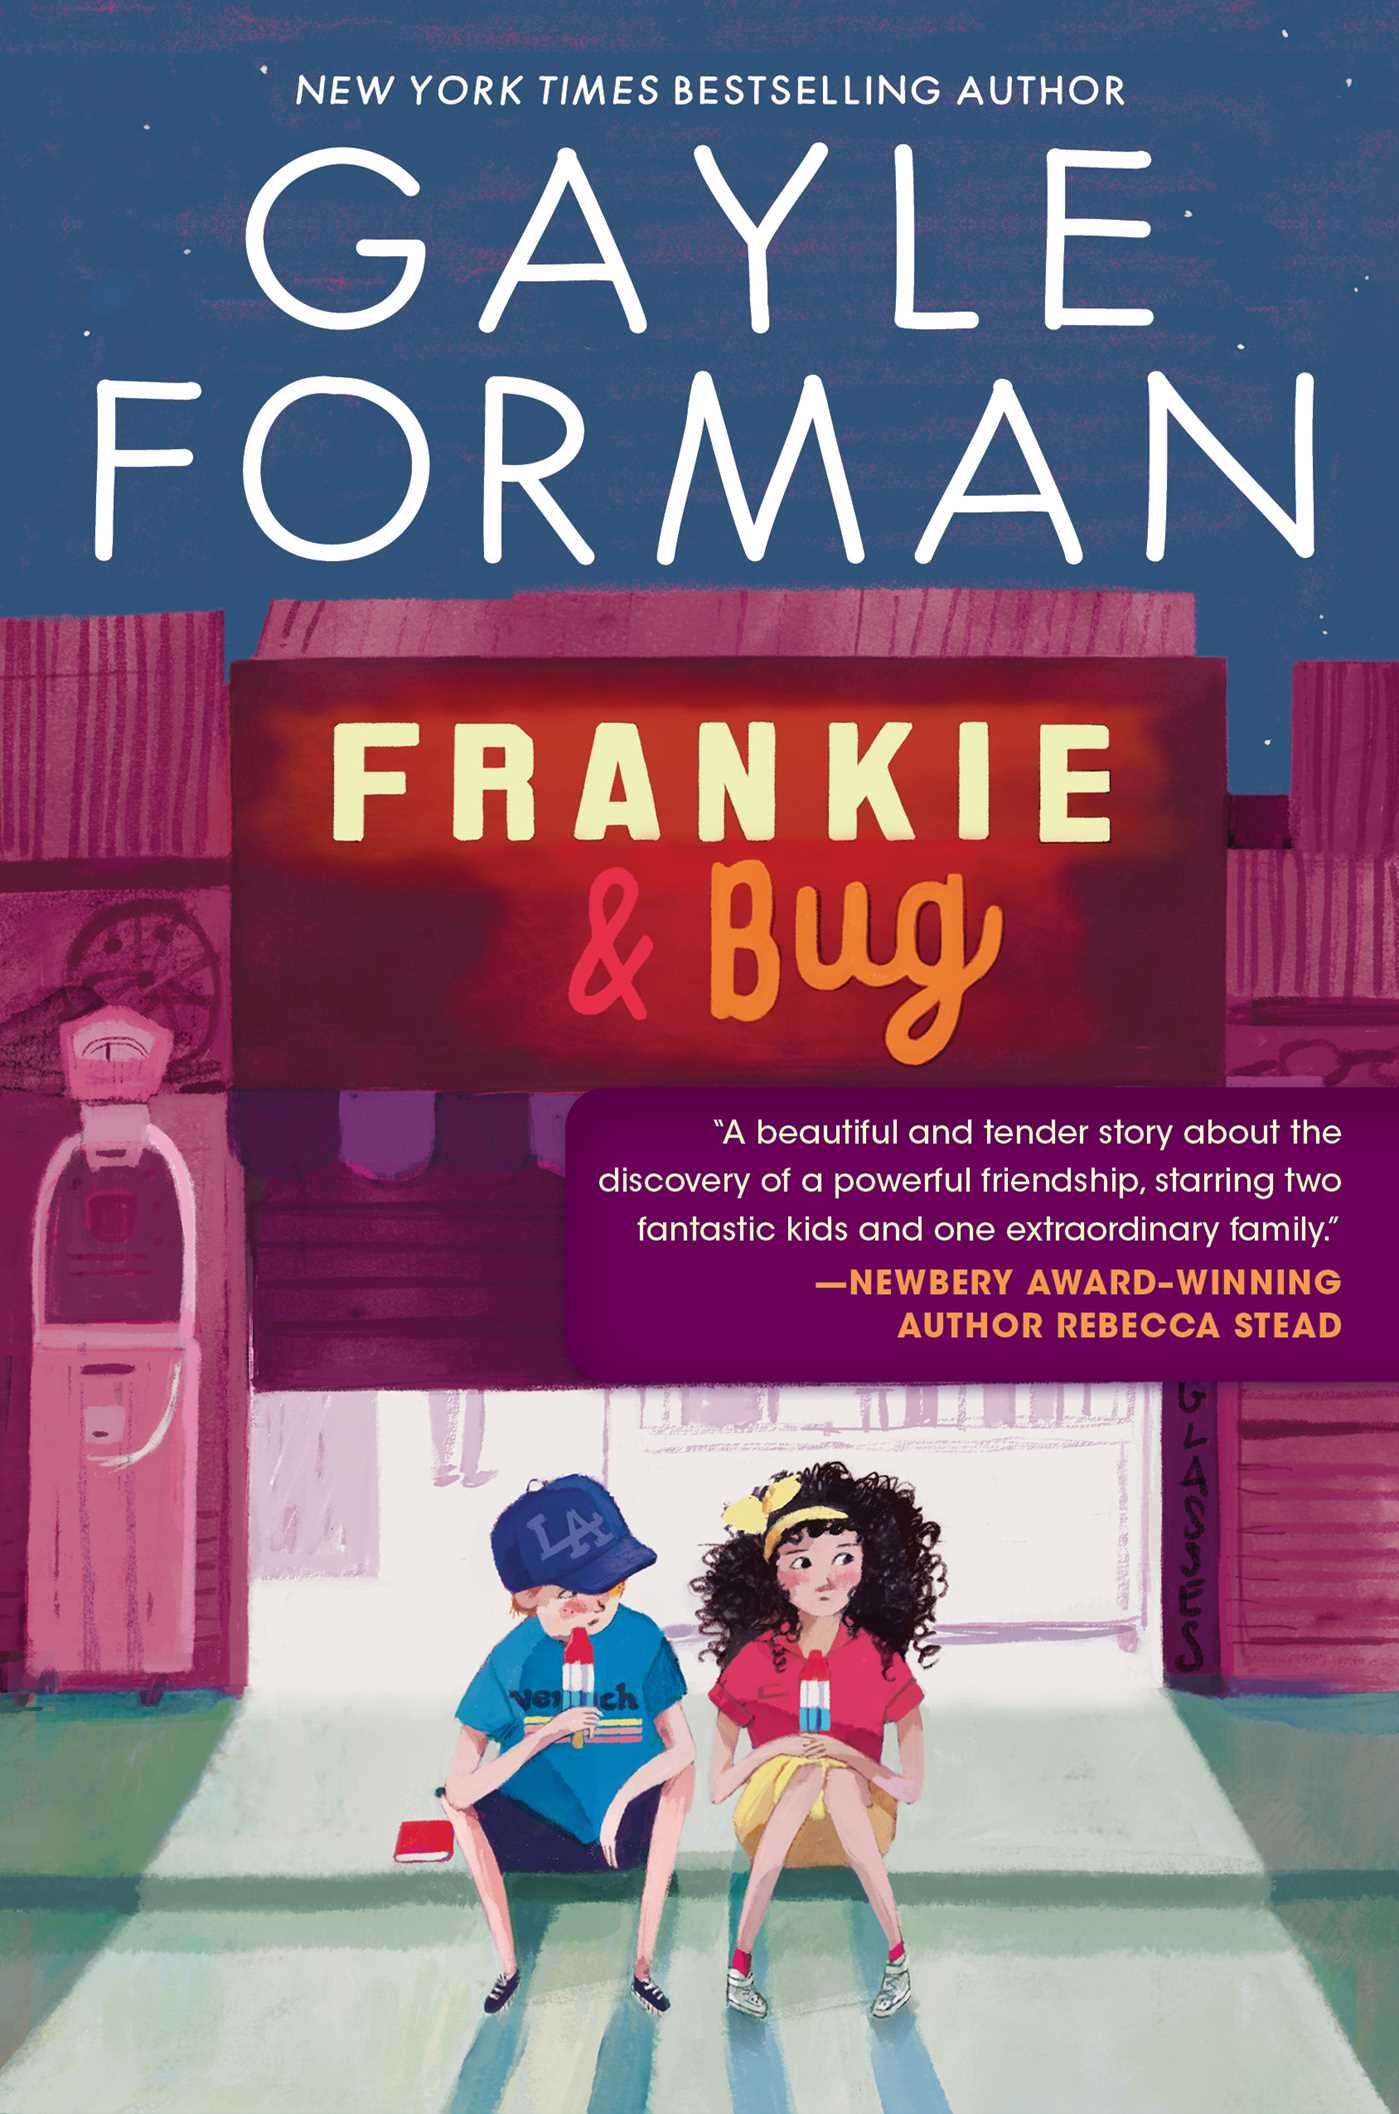 Book cover for "Frankie & Bug"